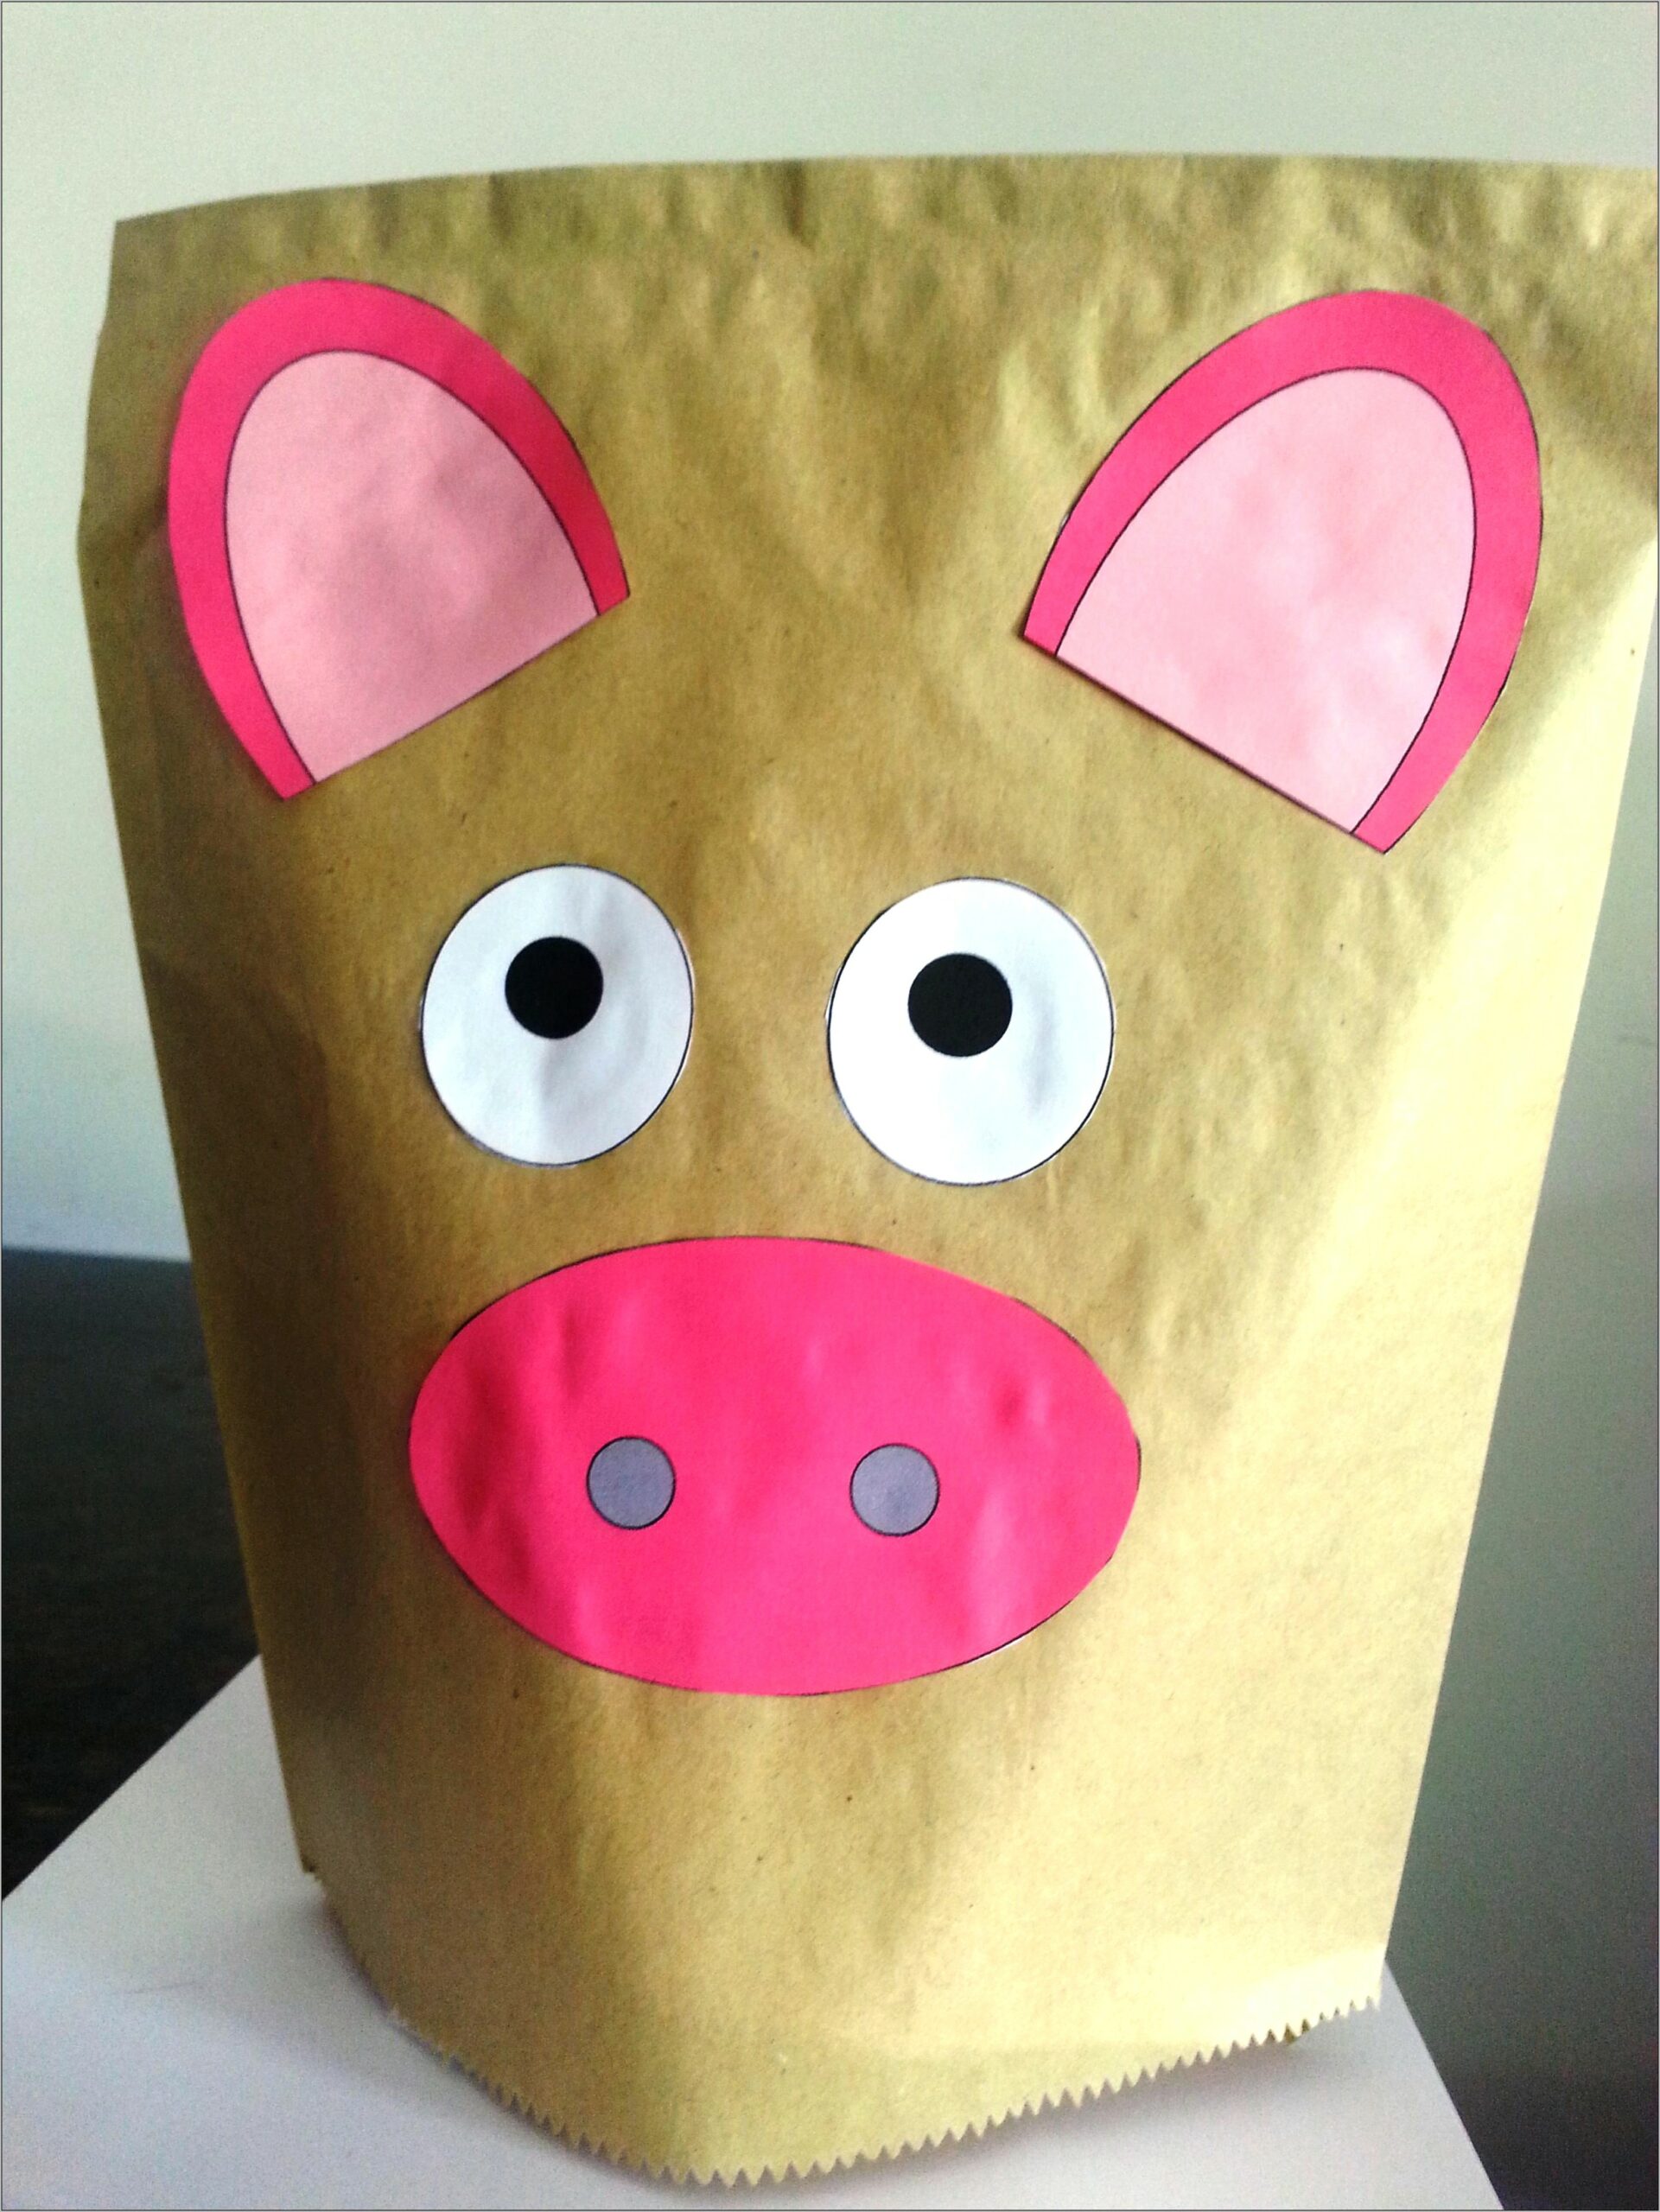 Free Dog Paper Bag Puppet Templates